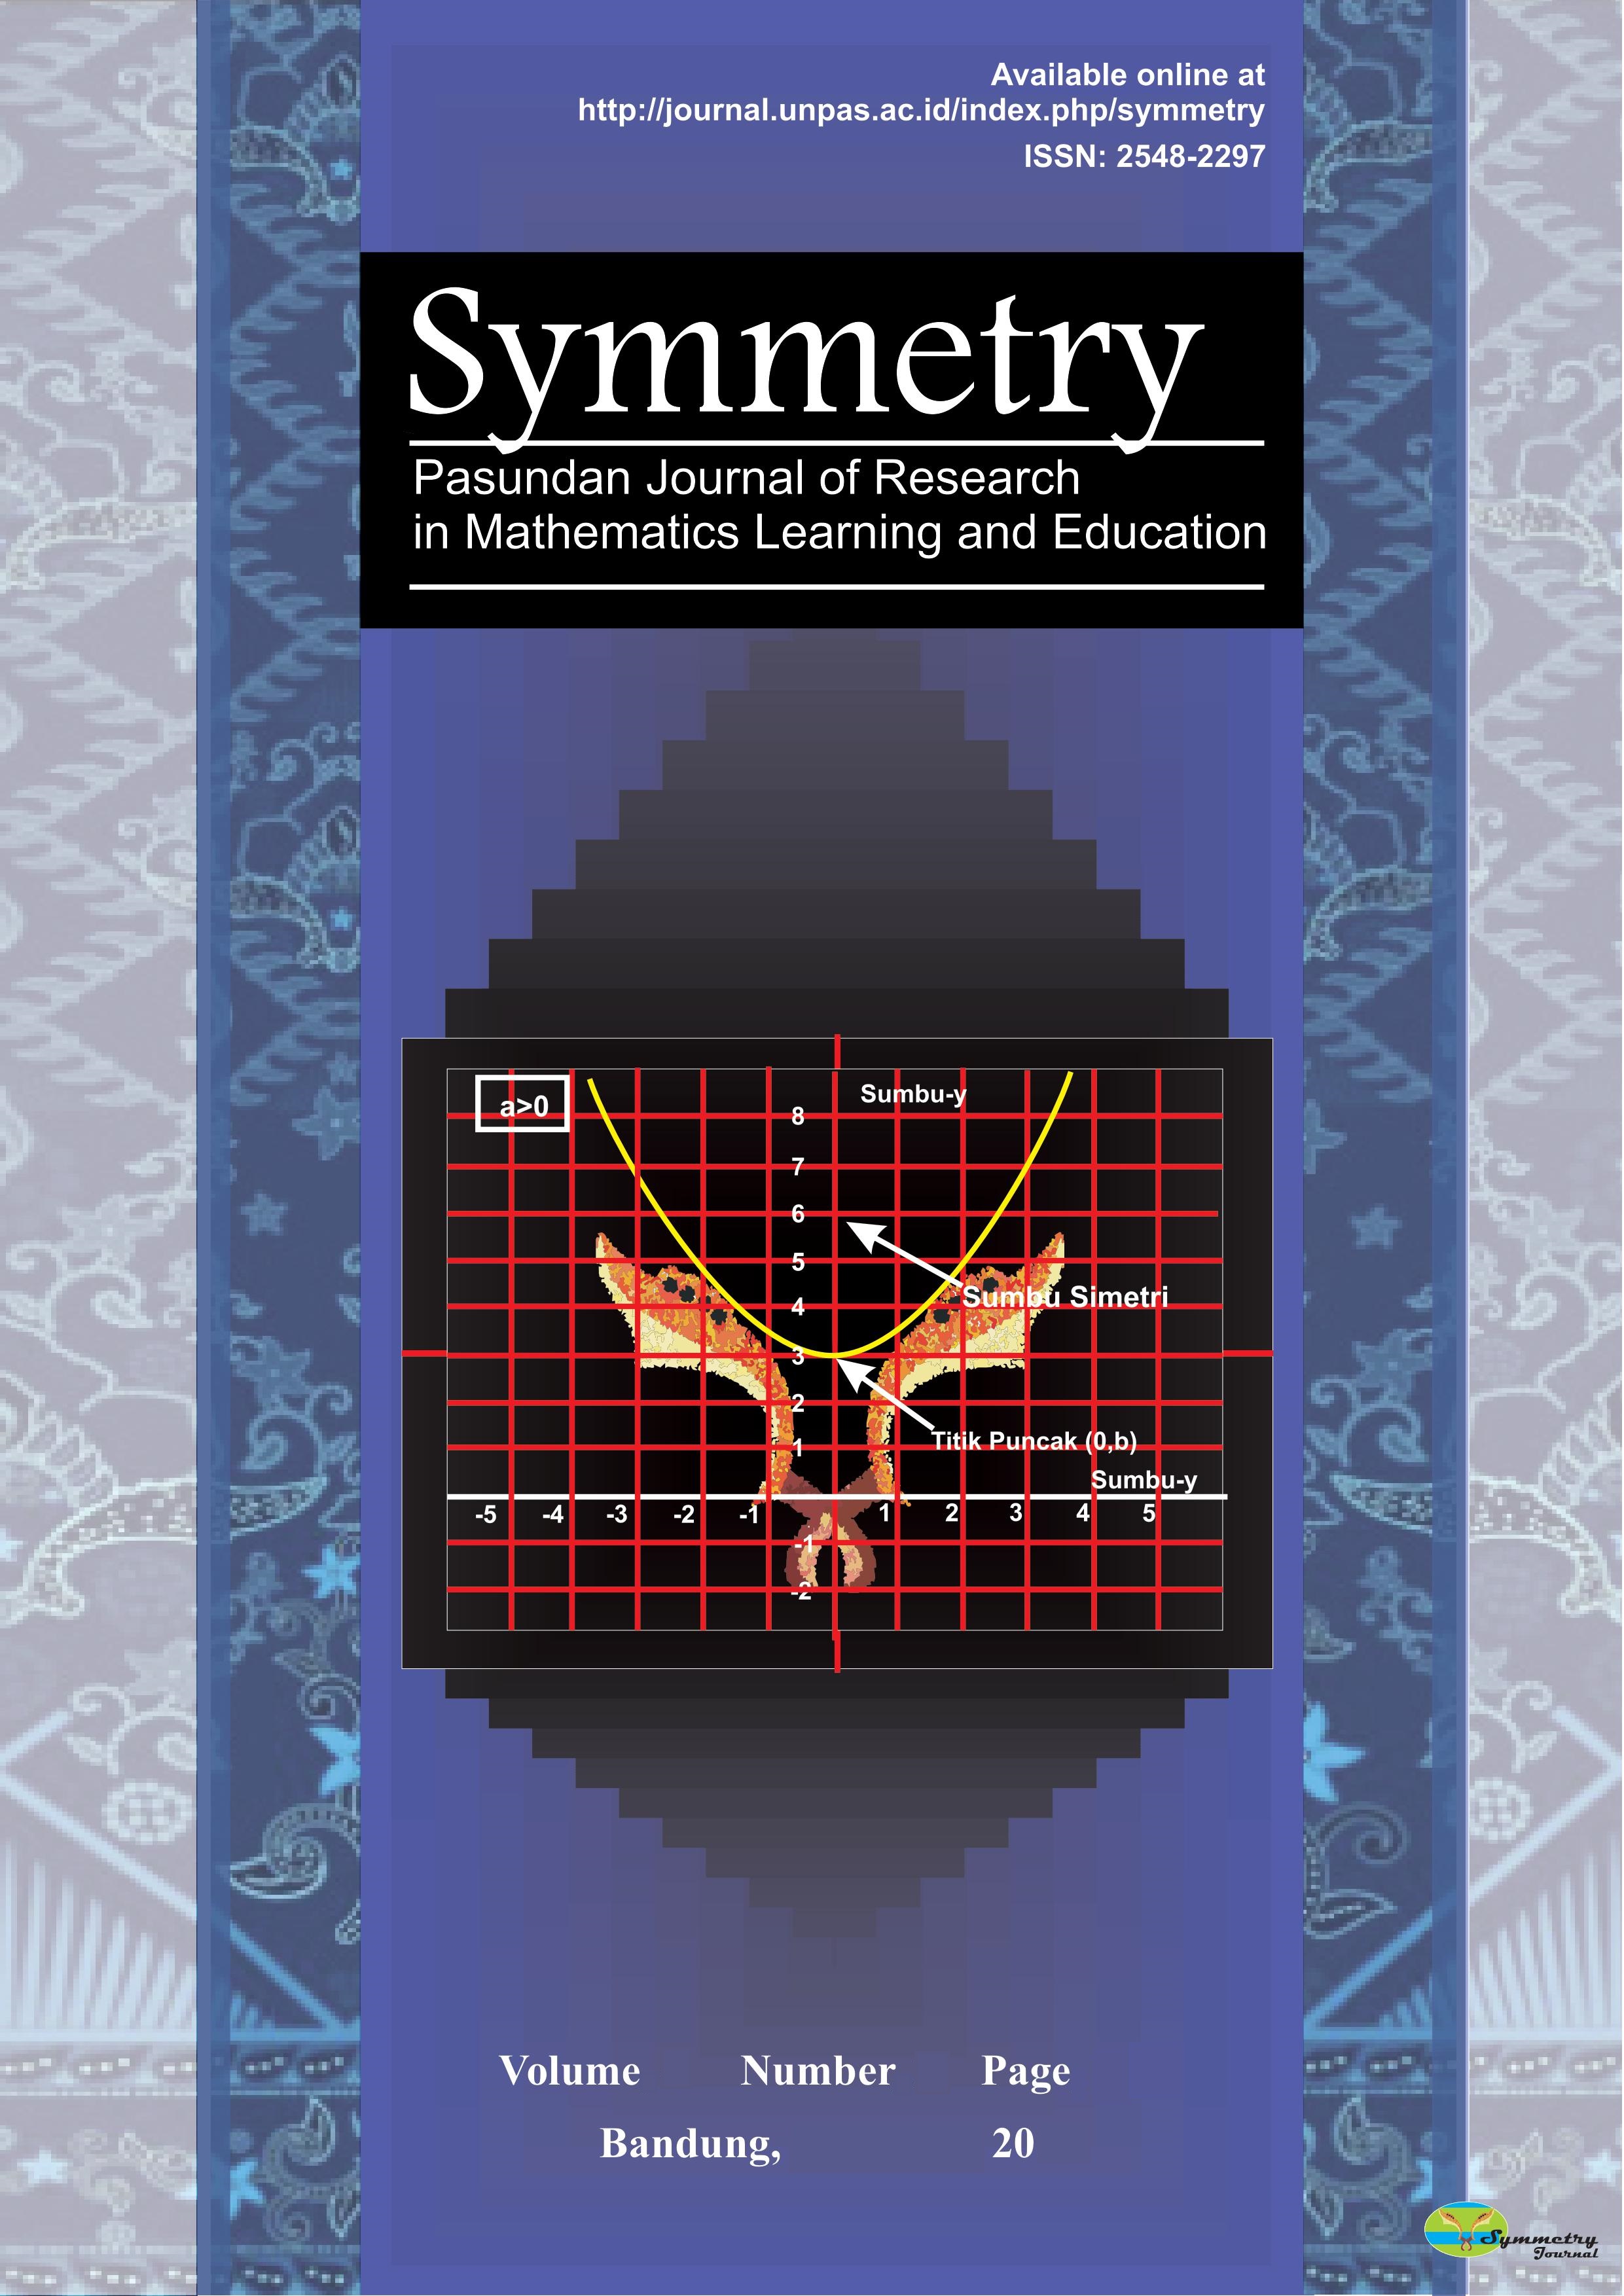 					Lihat Vol 7 No 2 (2022): Symmetry: Pasundan Journal of Research in Mathematics Learning and Education
				